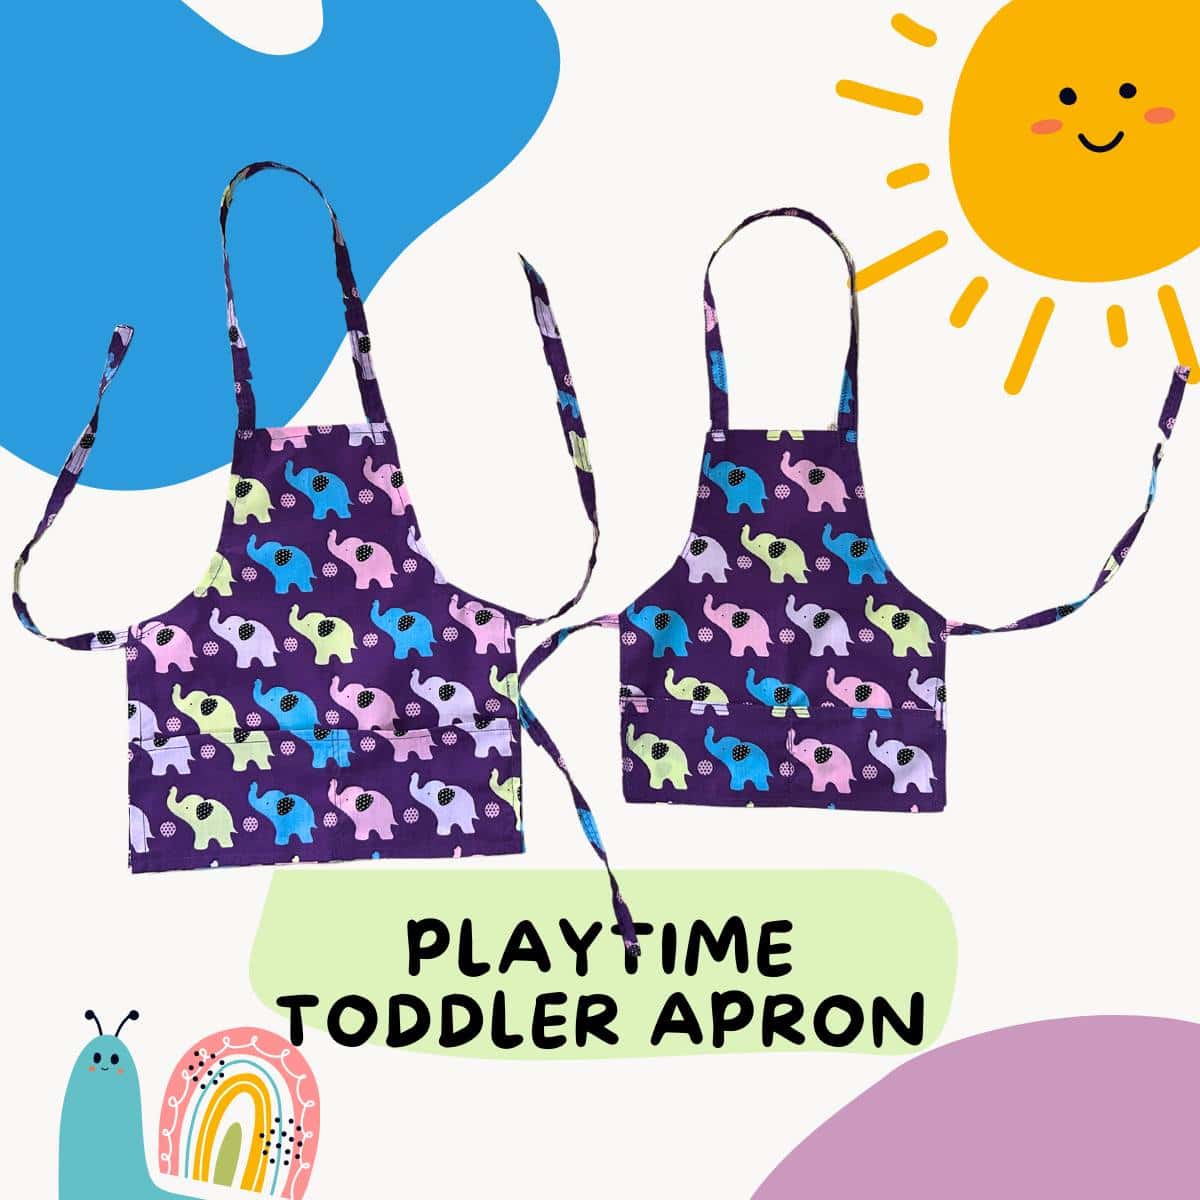 How to Make a Toddler Apron